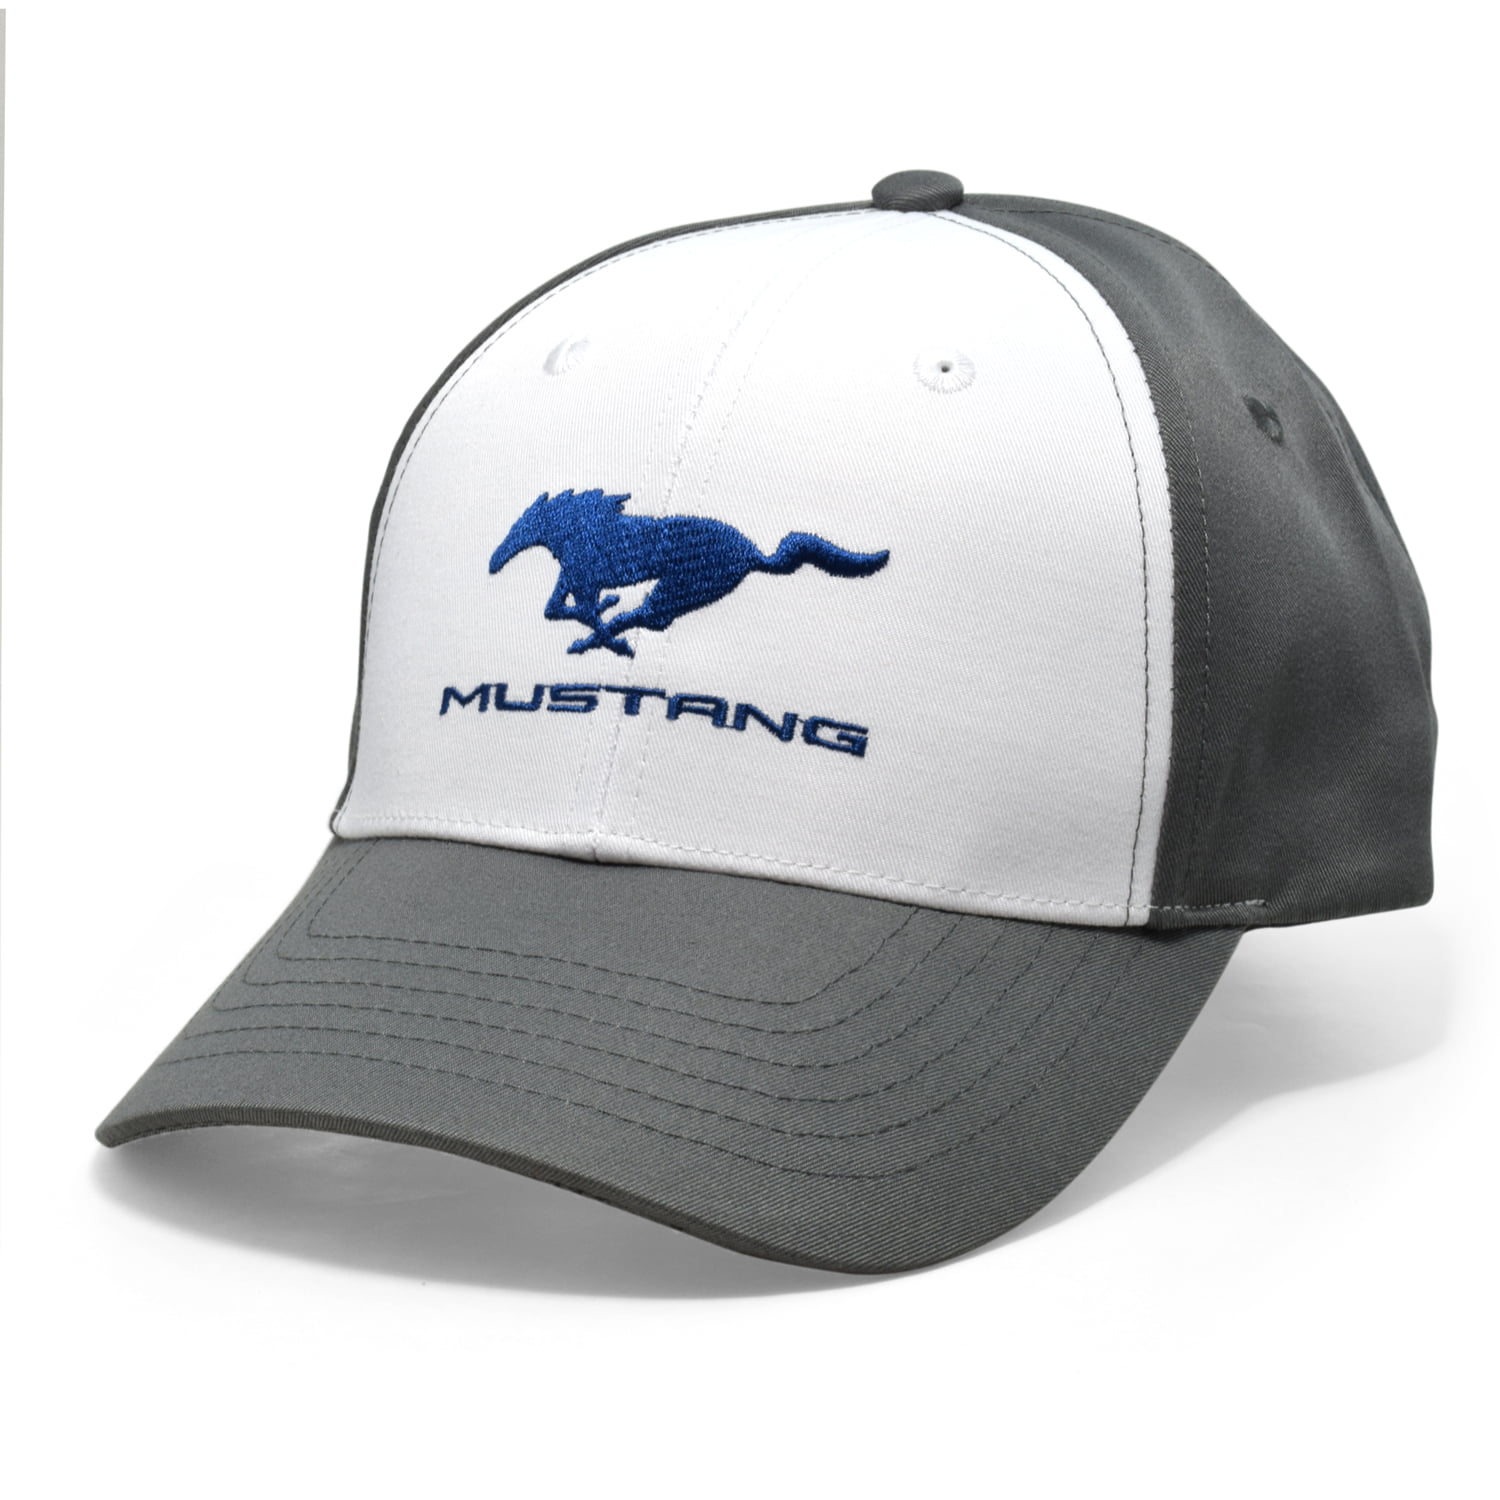 Ford Mustang Gray and White with Blue Pony Baseball Cap